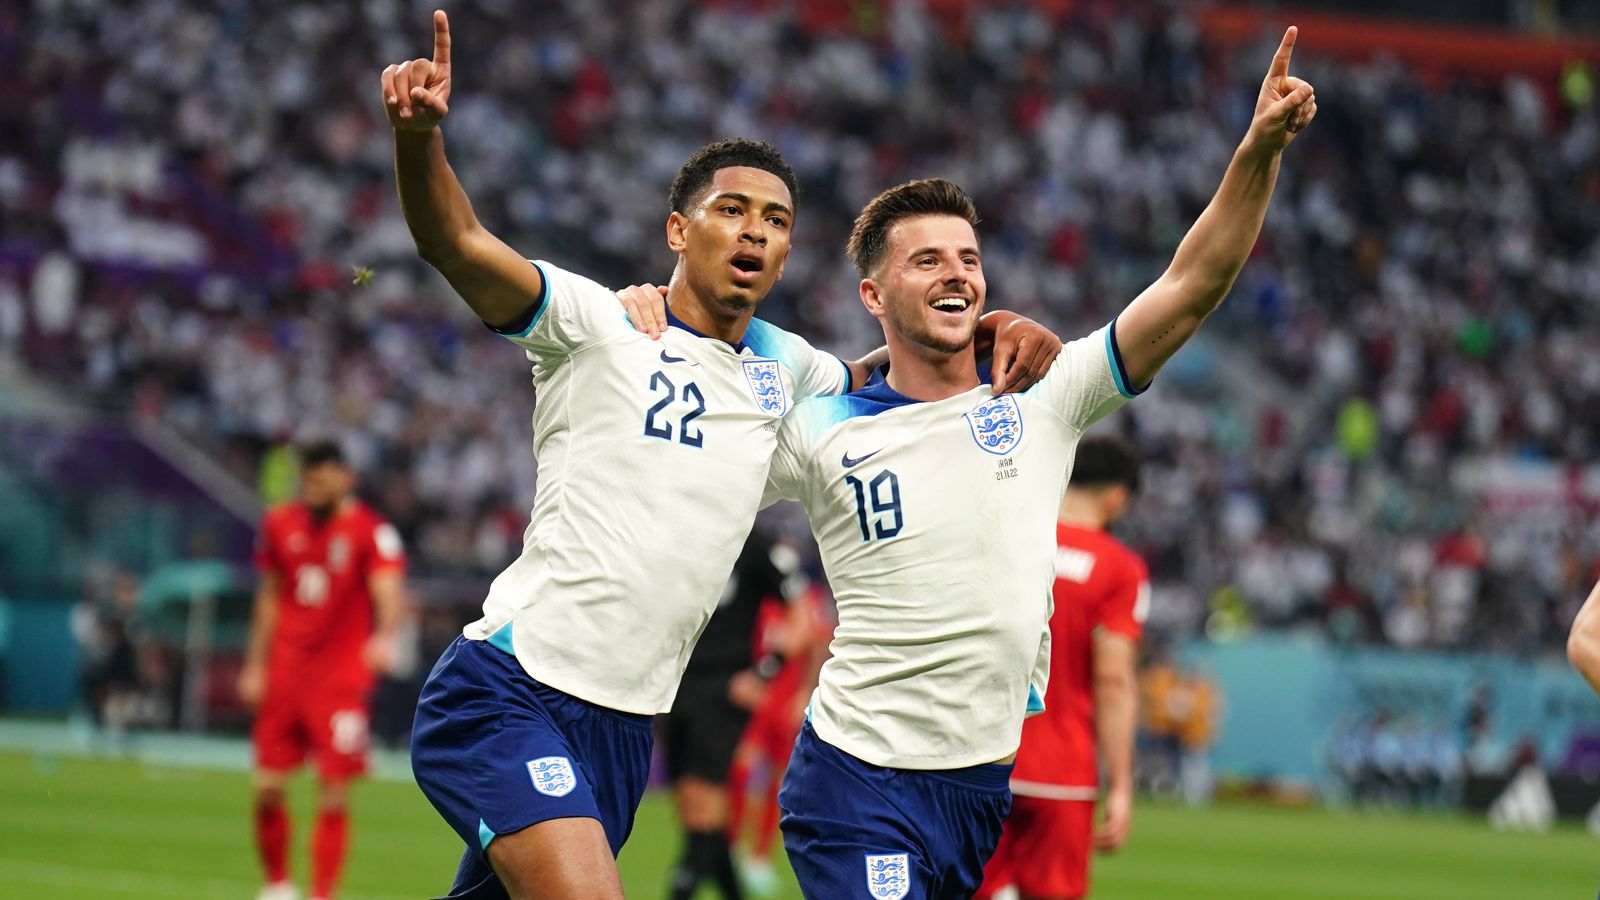 England's route to World Cup glory: If they beat Senegal, who could the Three Lions face next?